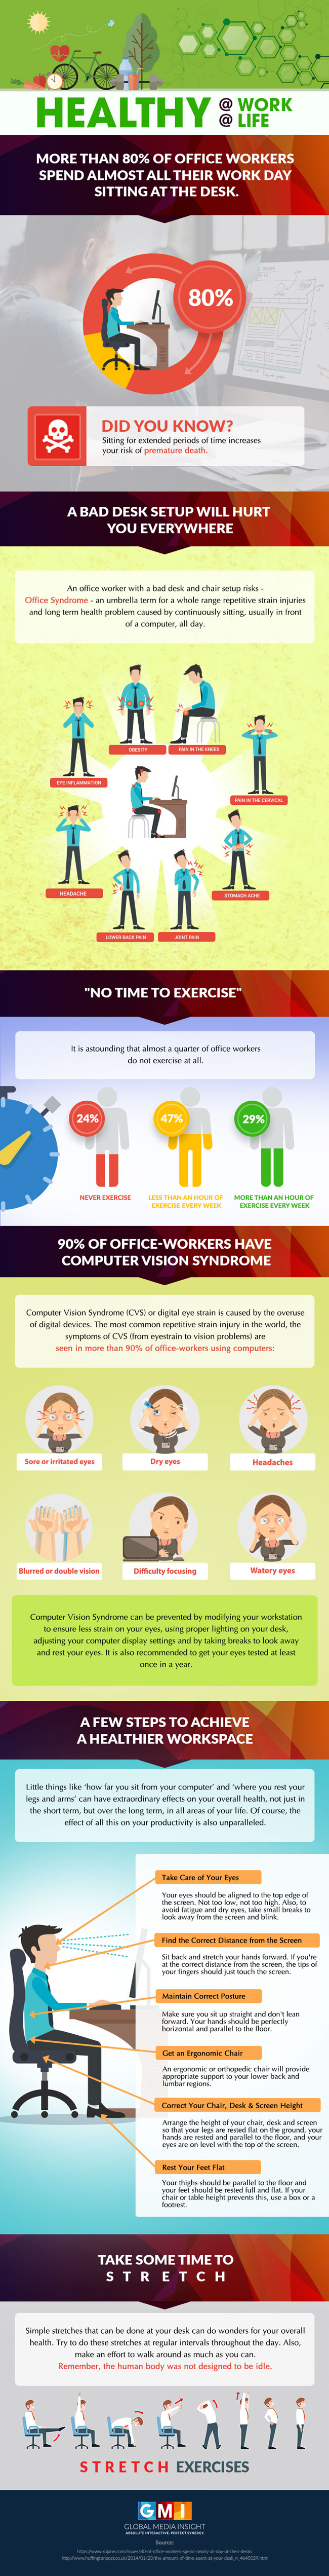 Office Health and Wellness Tips by Global Media Insight